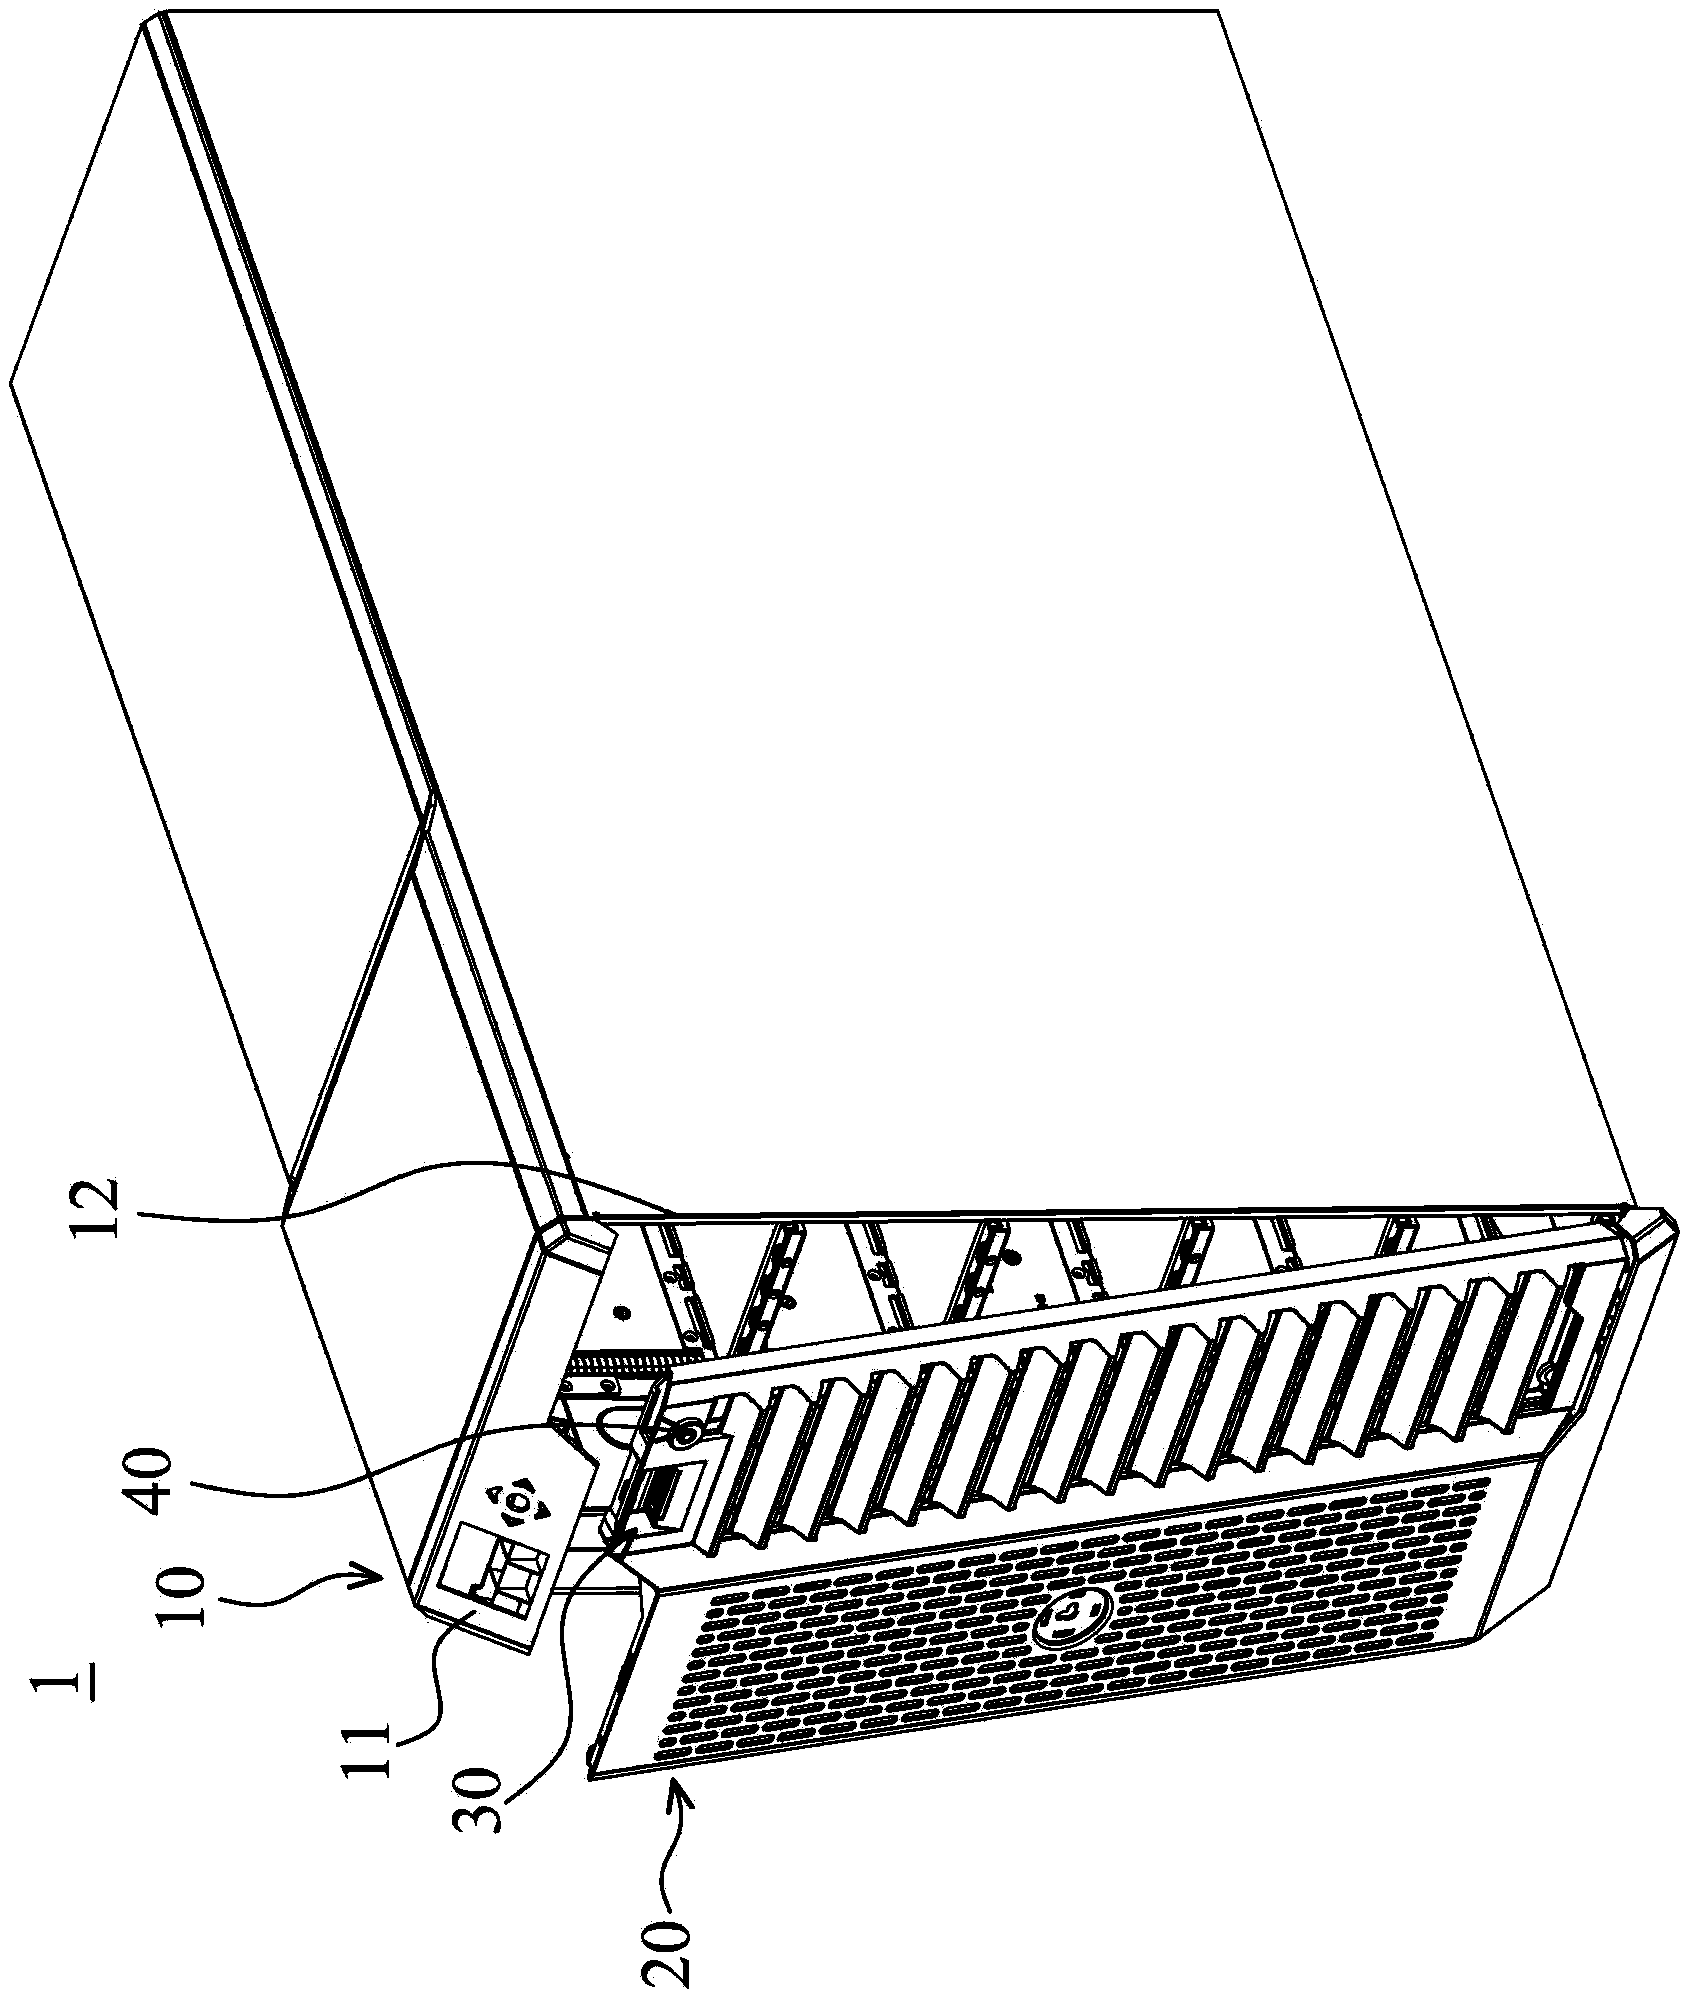 Computer housing with locking function